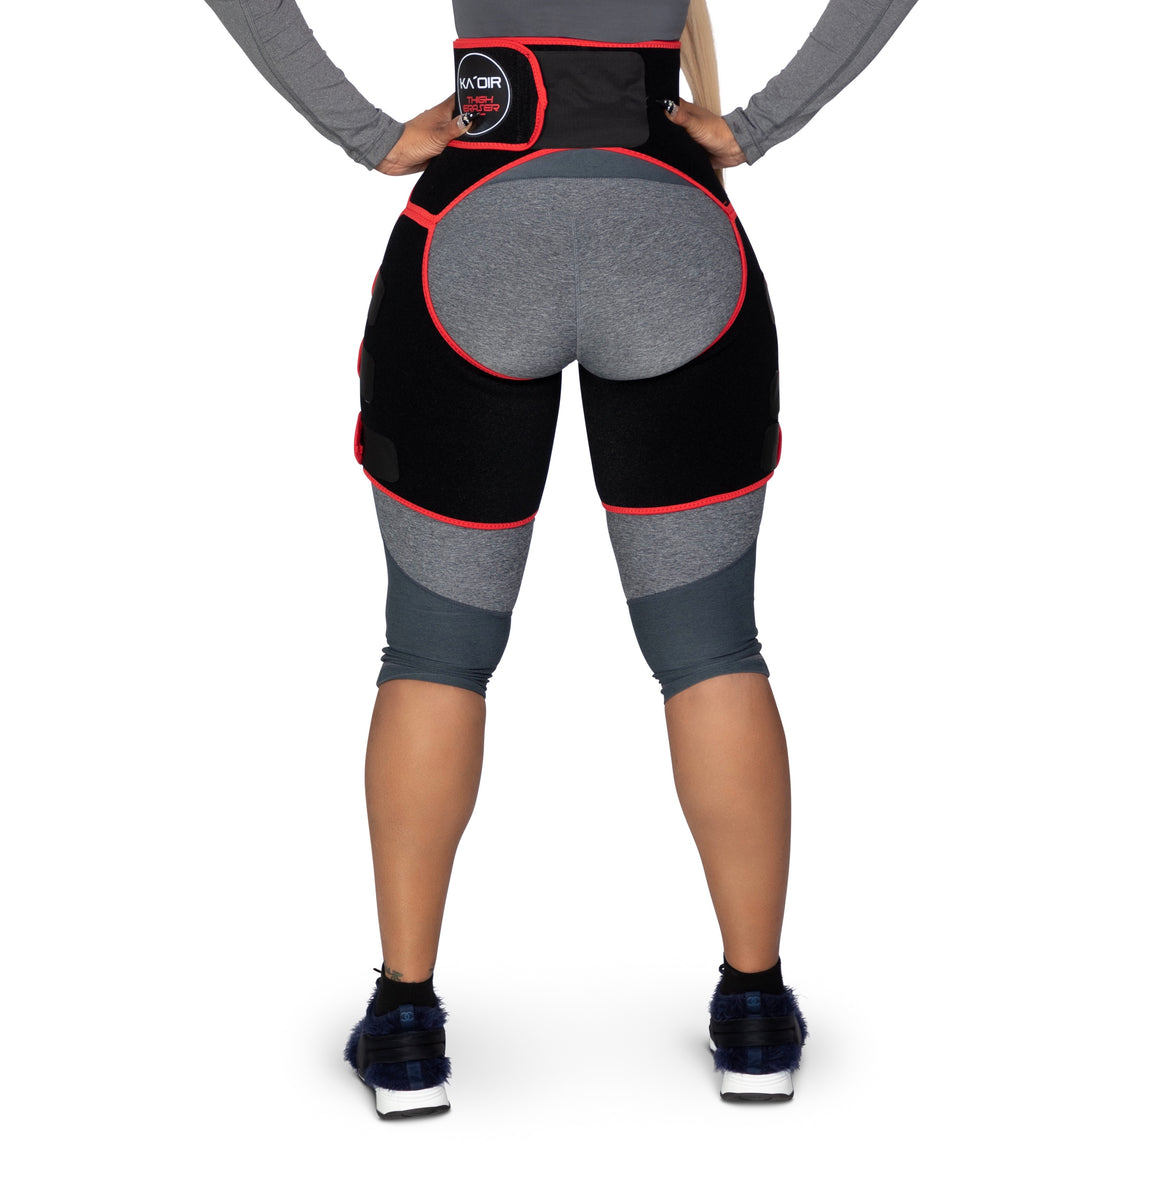 Our combo eraser is great for shaping the waist & thighs while lifting  butt!